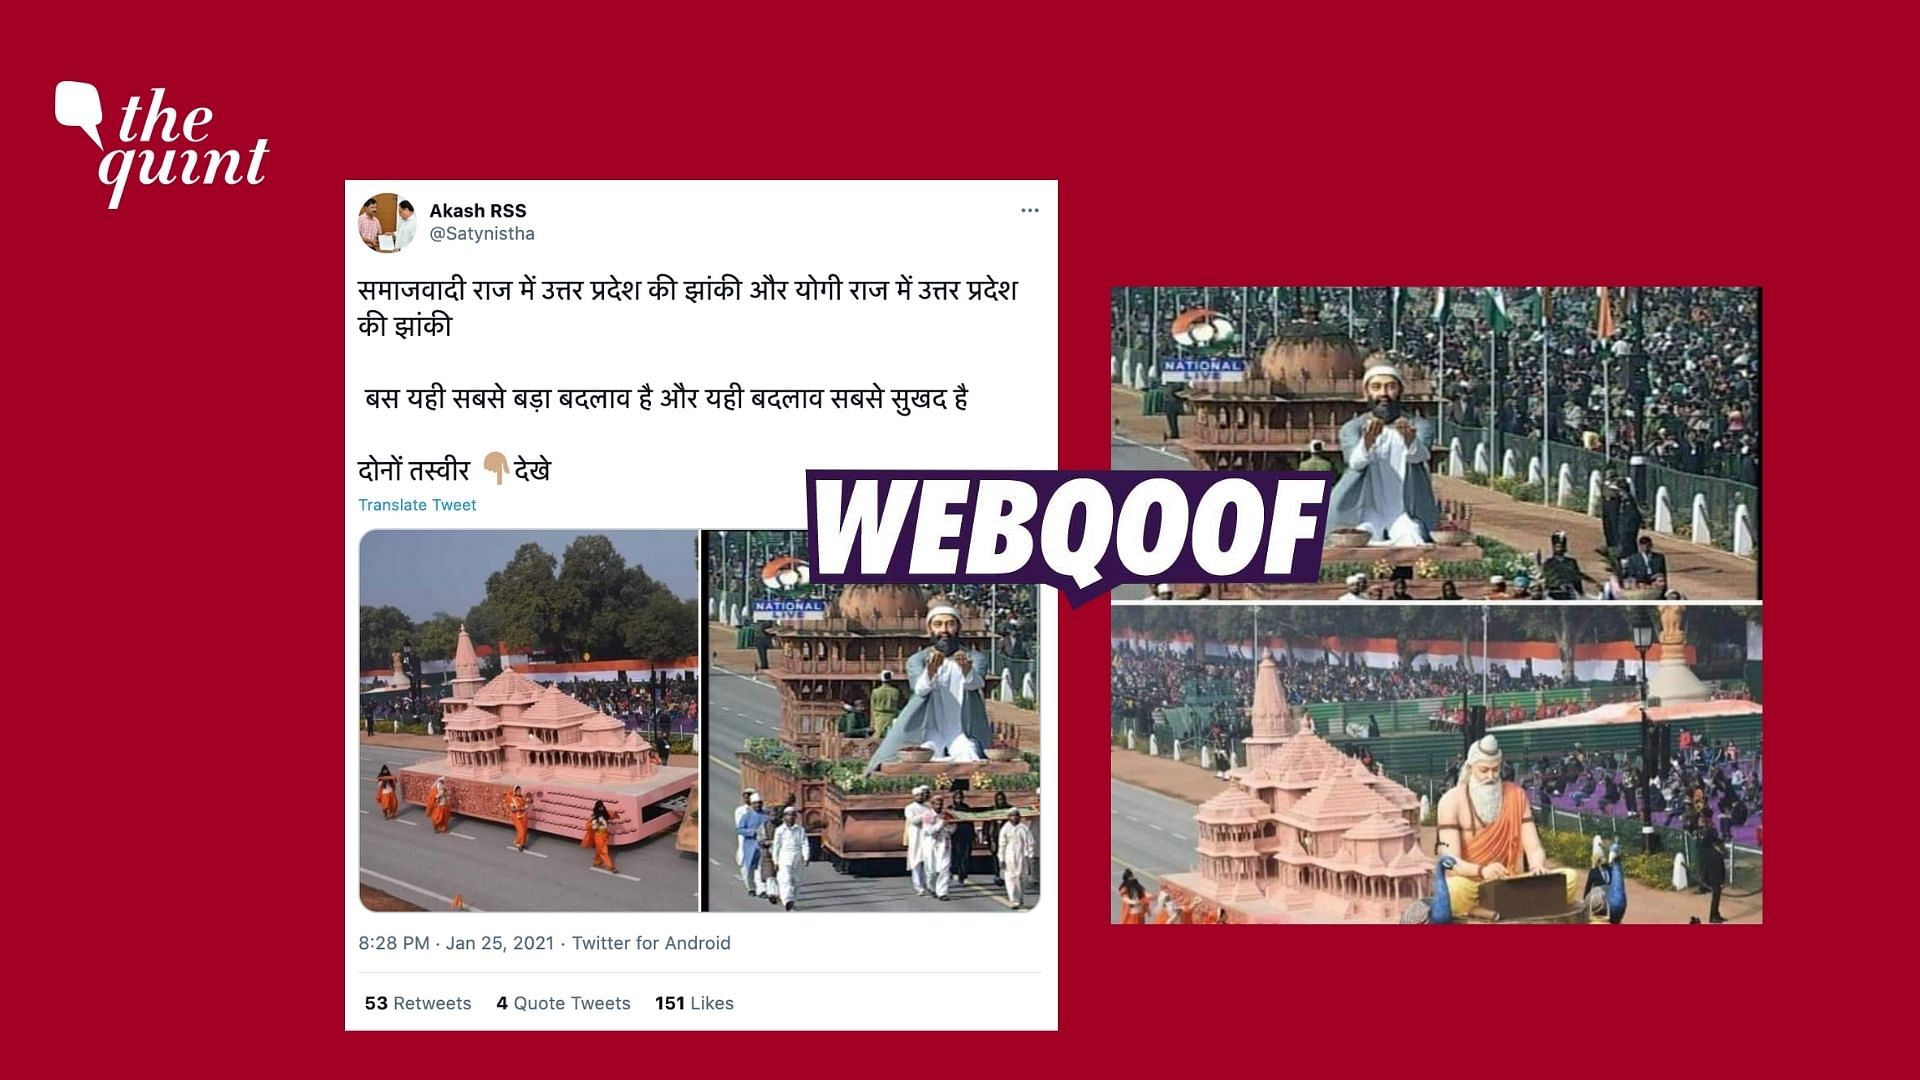 Social media users shared a set of images to falsely claim that one of them shows Uttar Pradesh’s tableau under the Samajwadi party government.